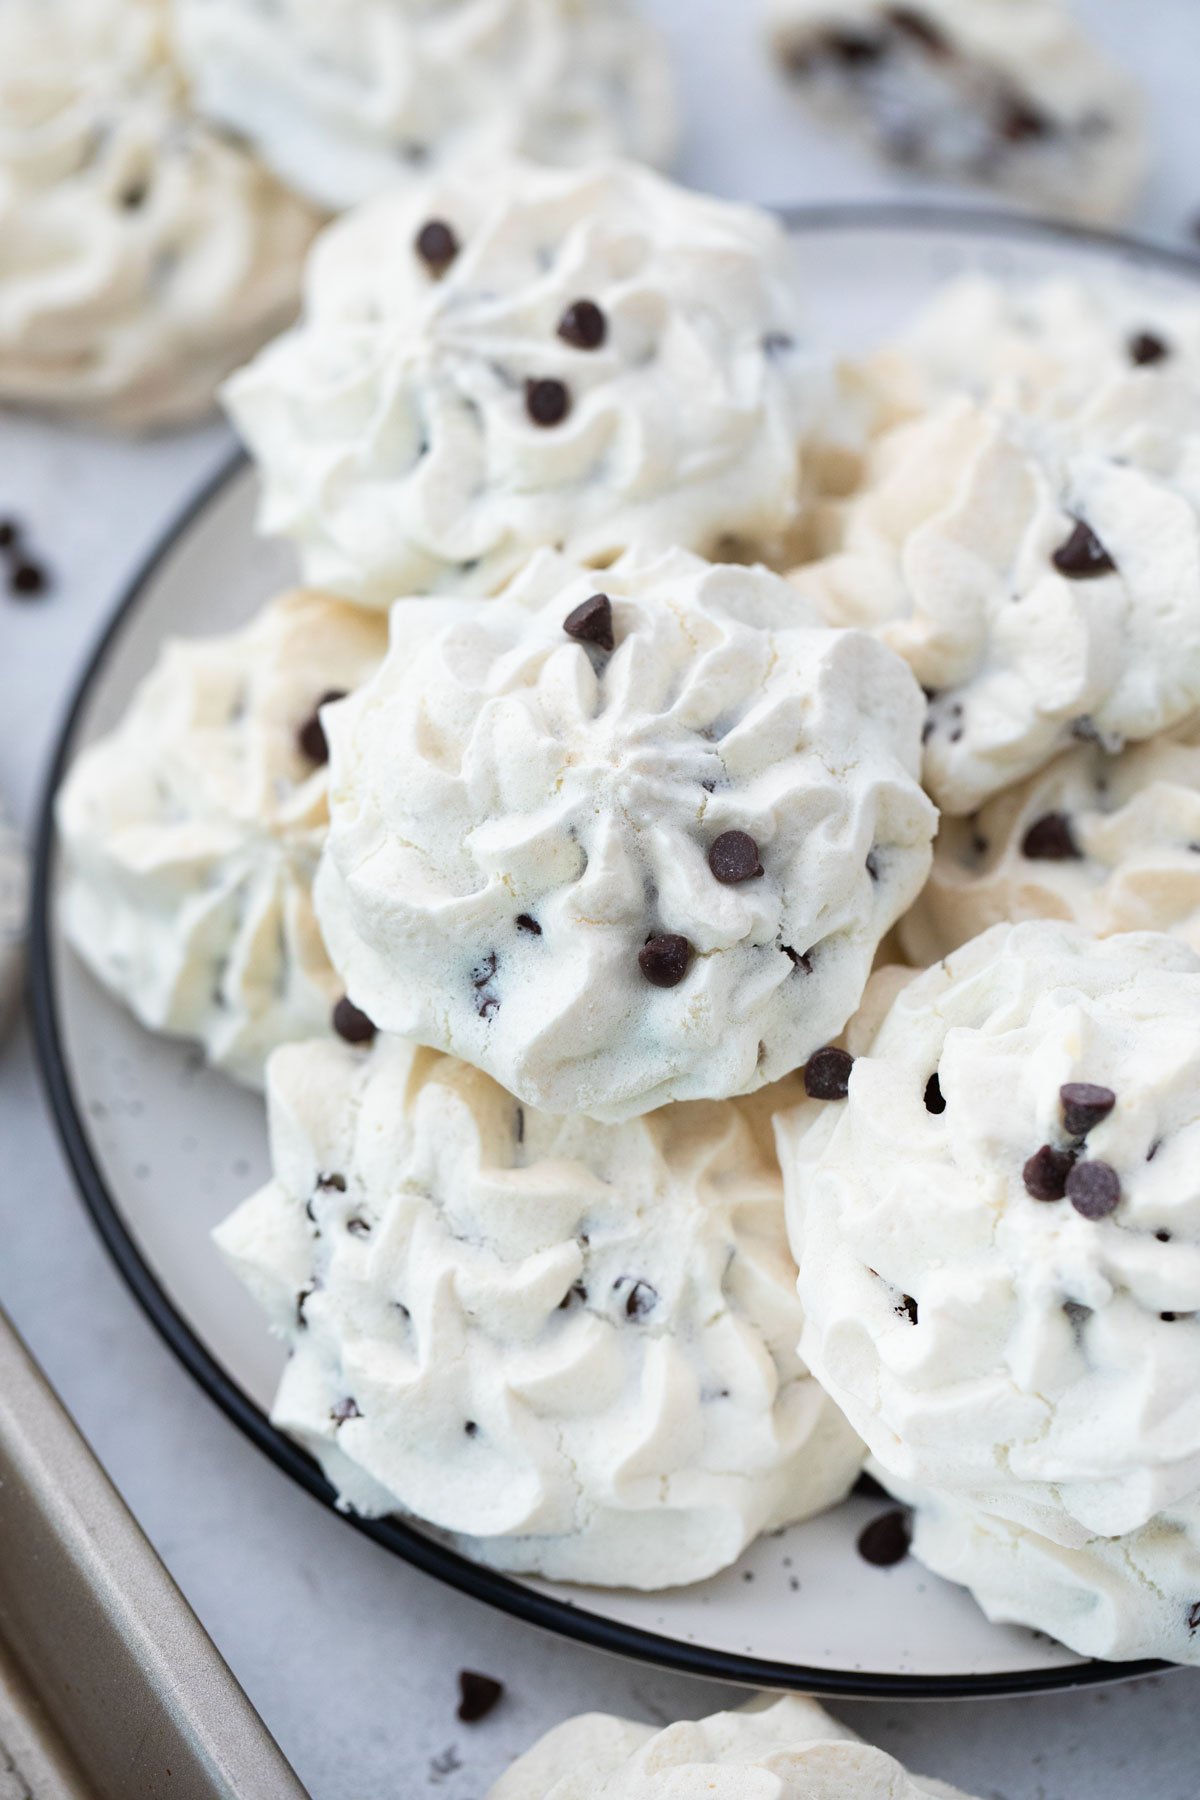 Chocolate chip meringue cookies on a plate